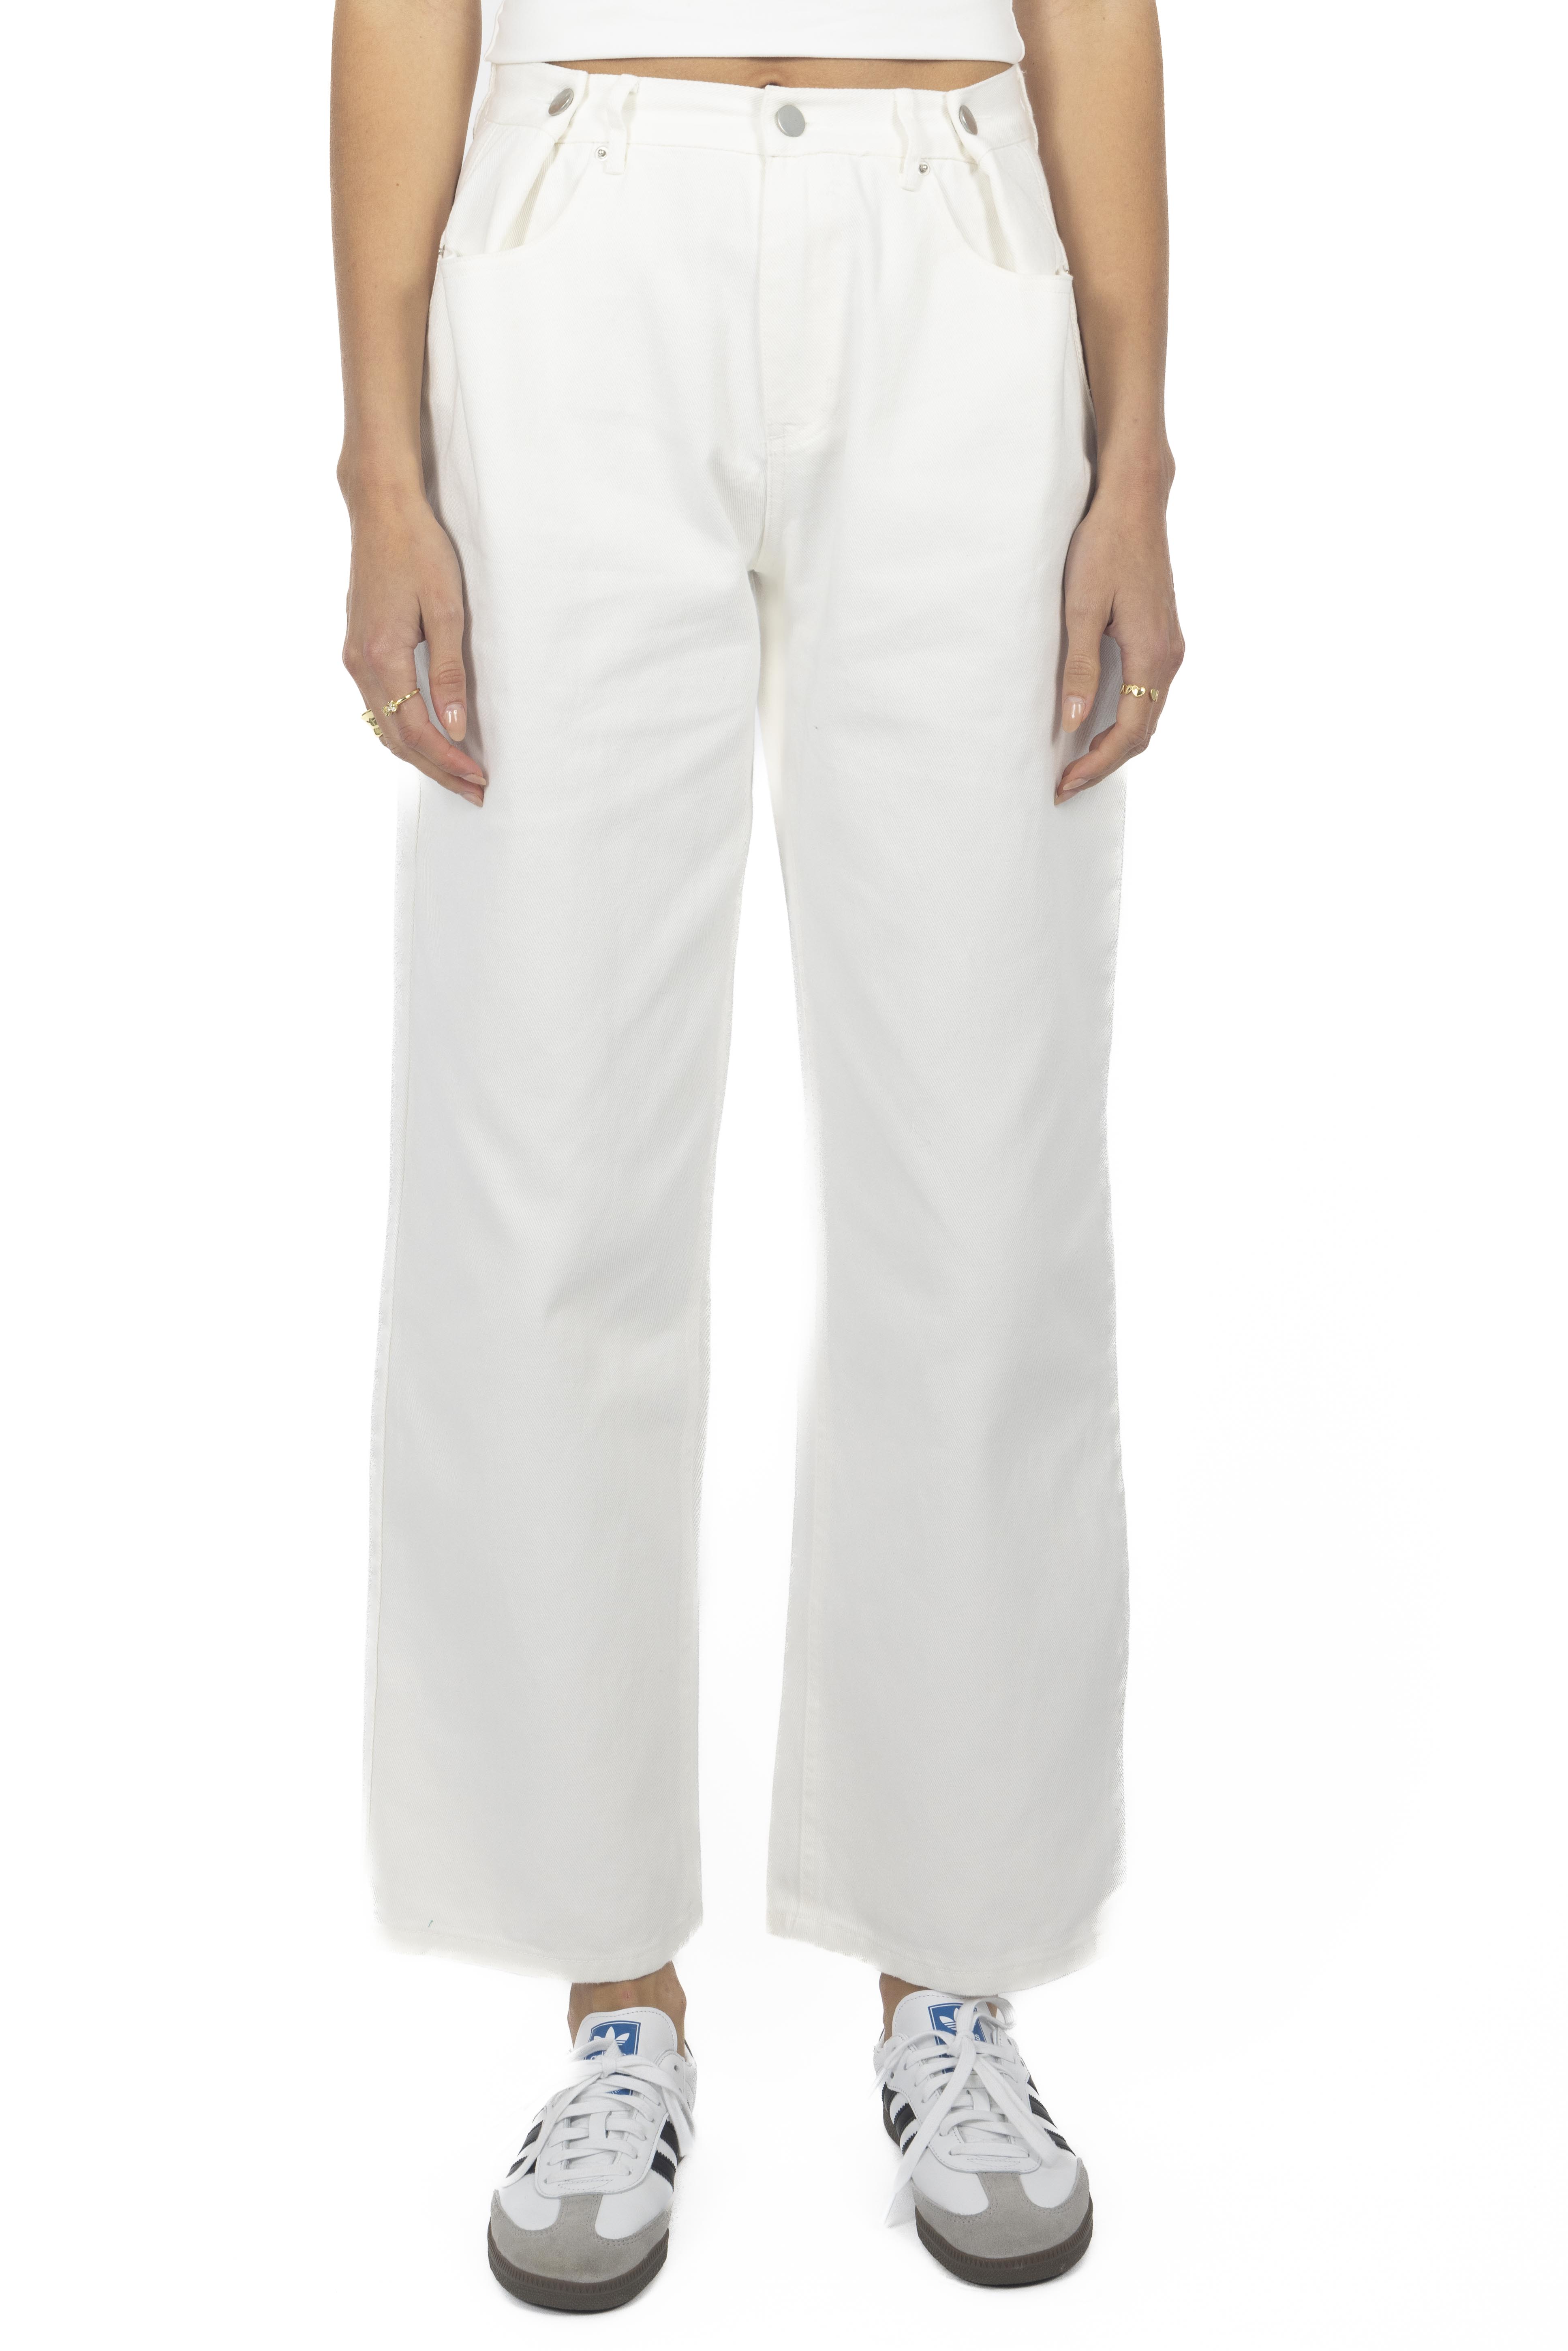 WHITE SLOUCHY JEANS